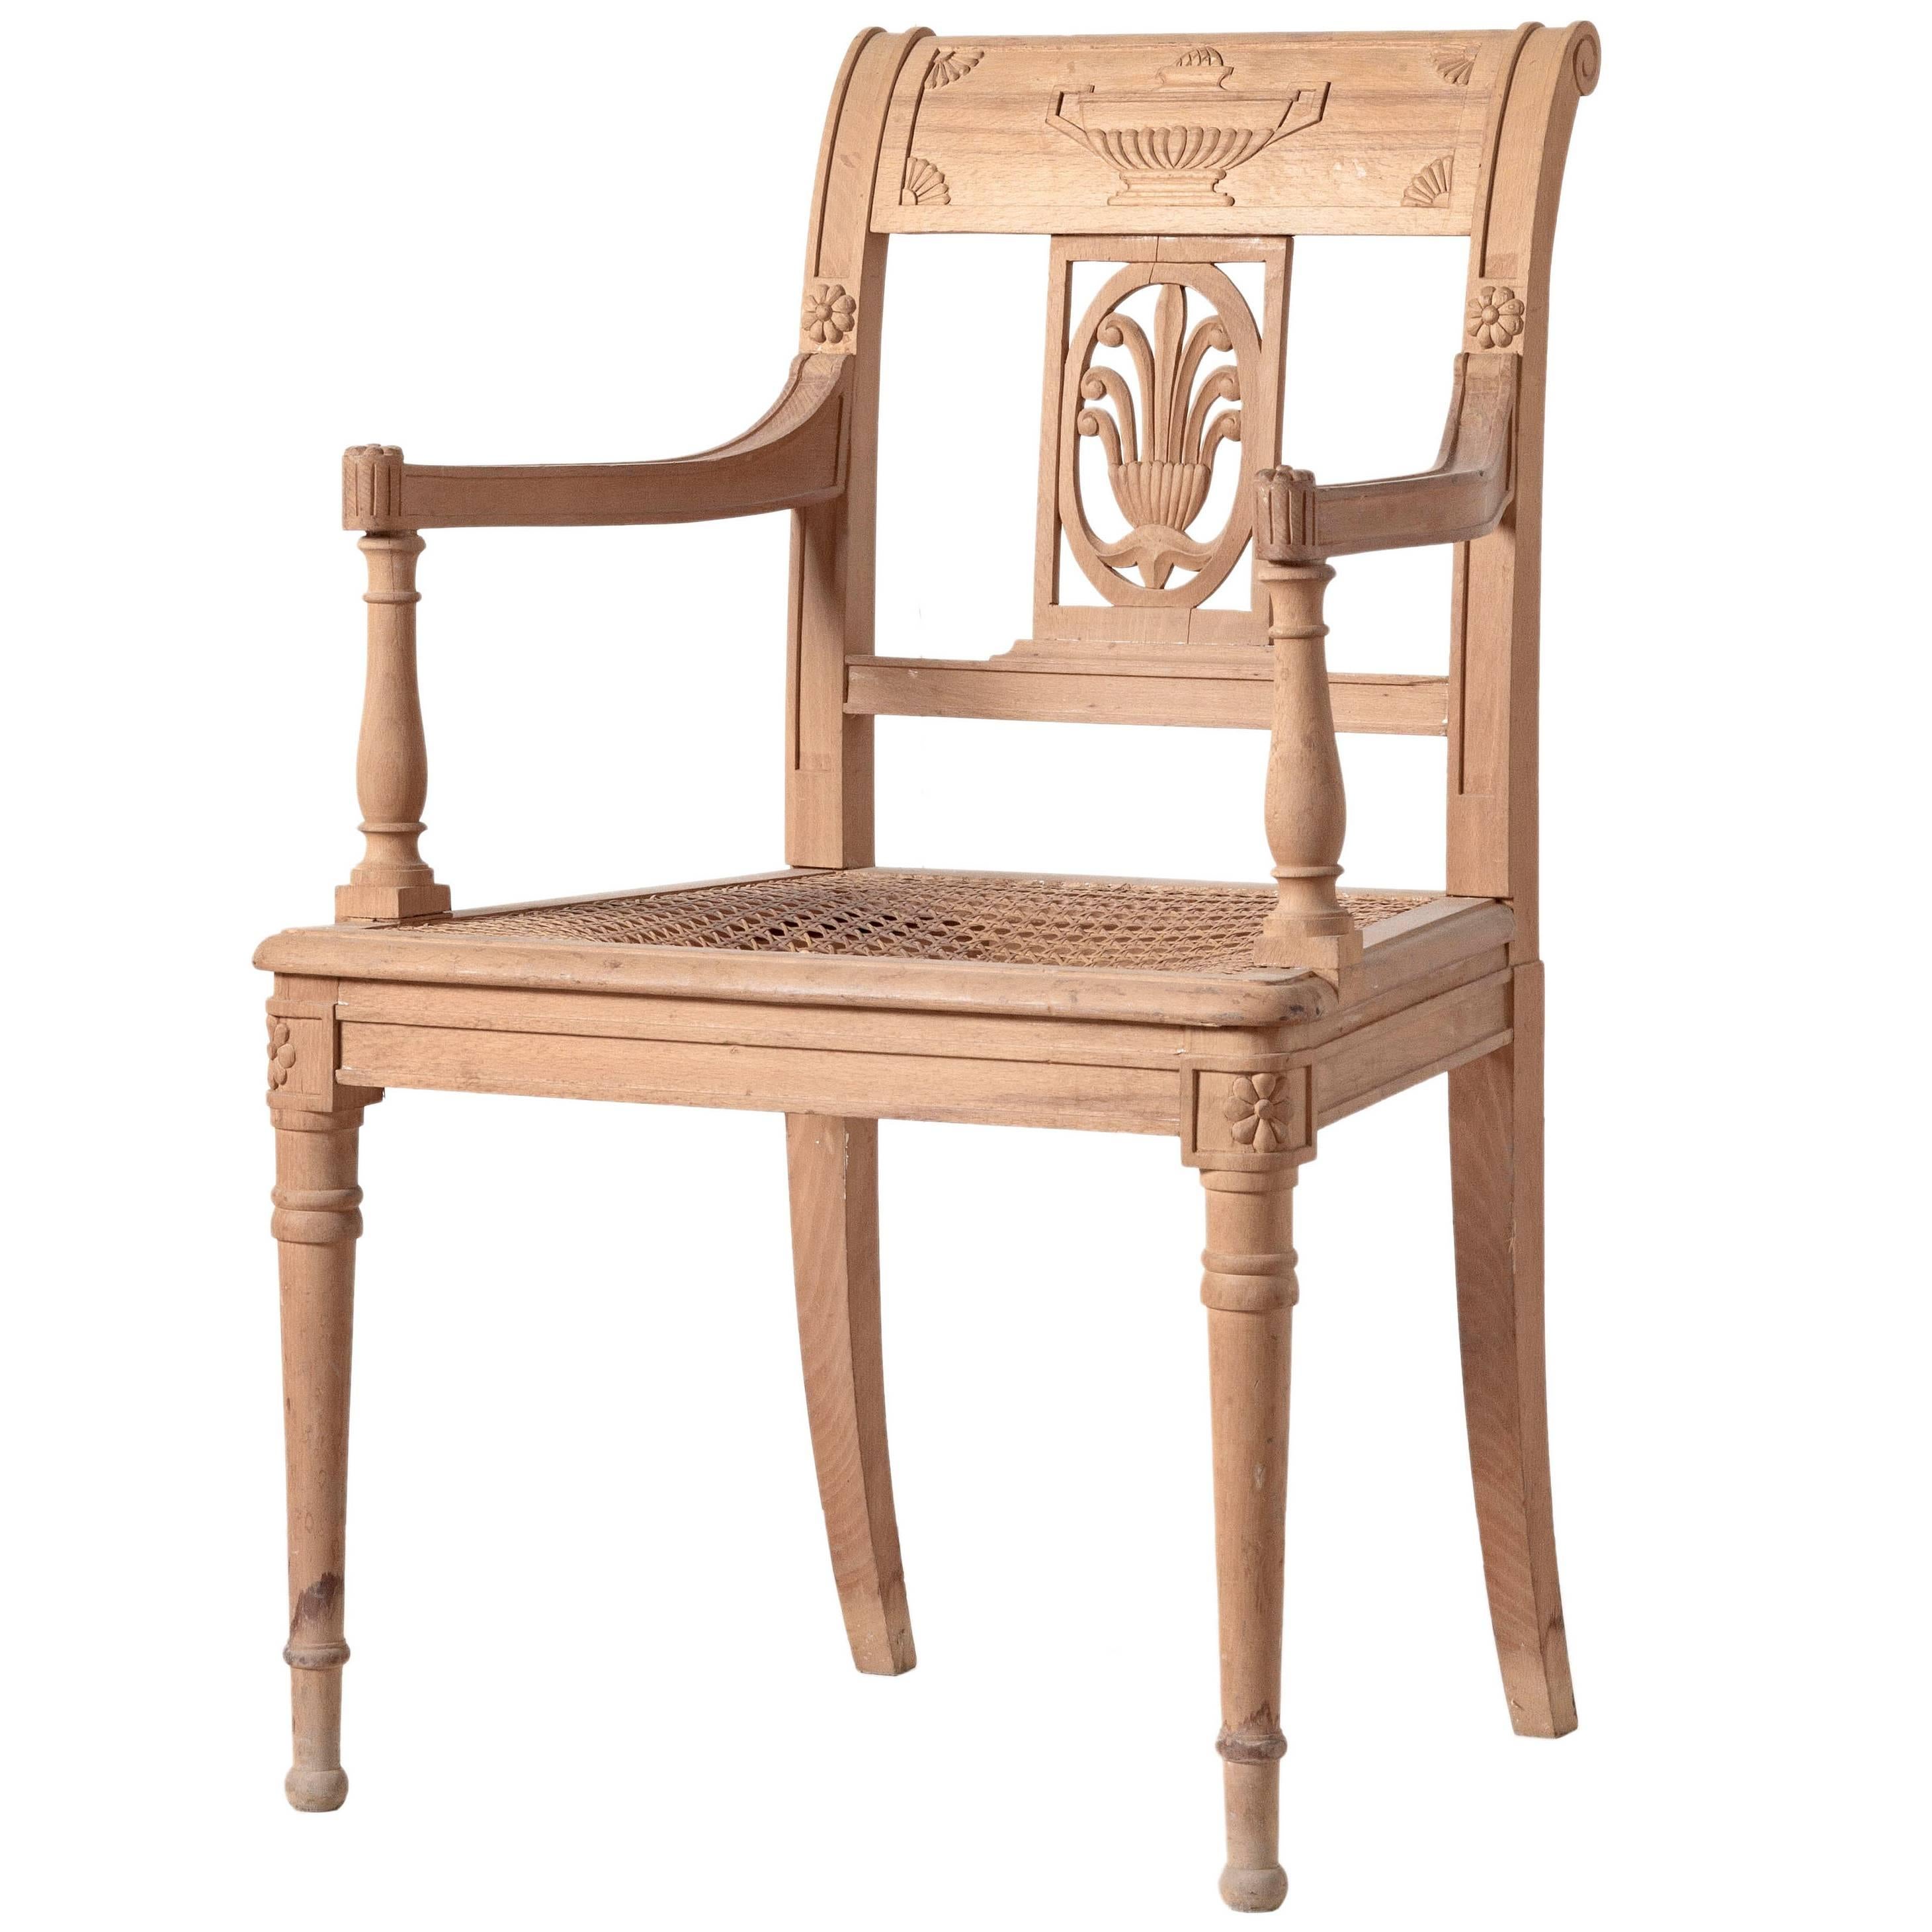 Directoire Style Open Armchair Hand-Carved